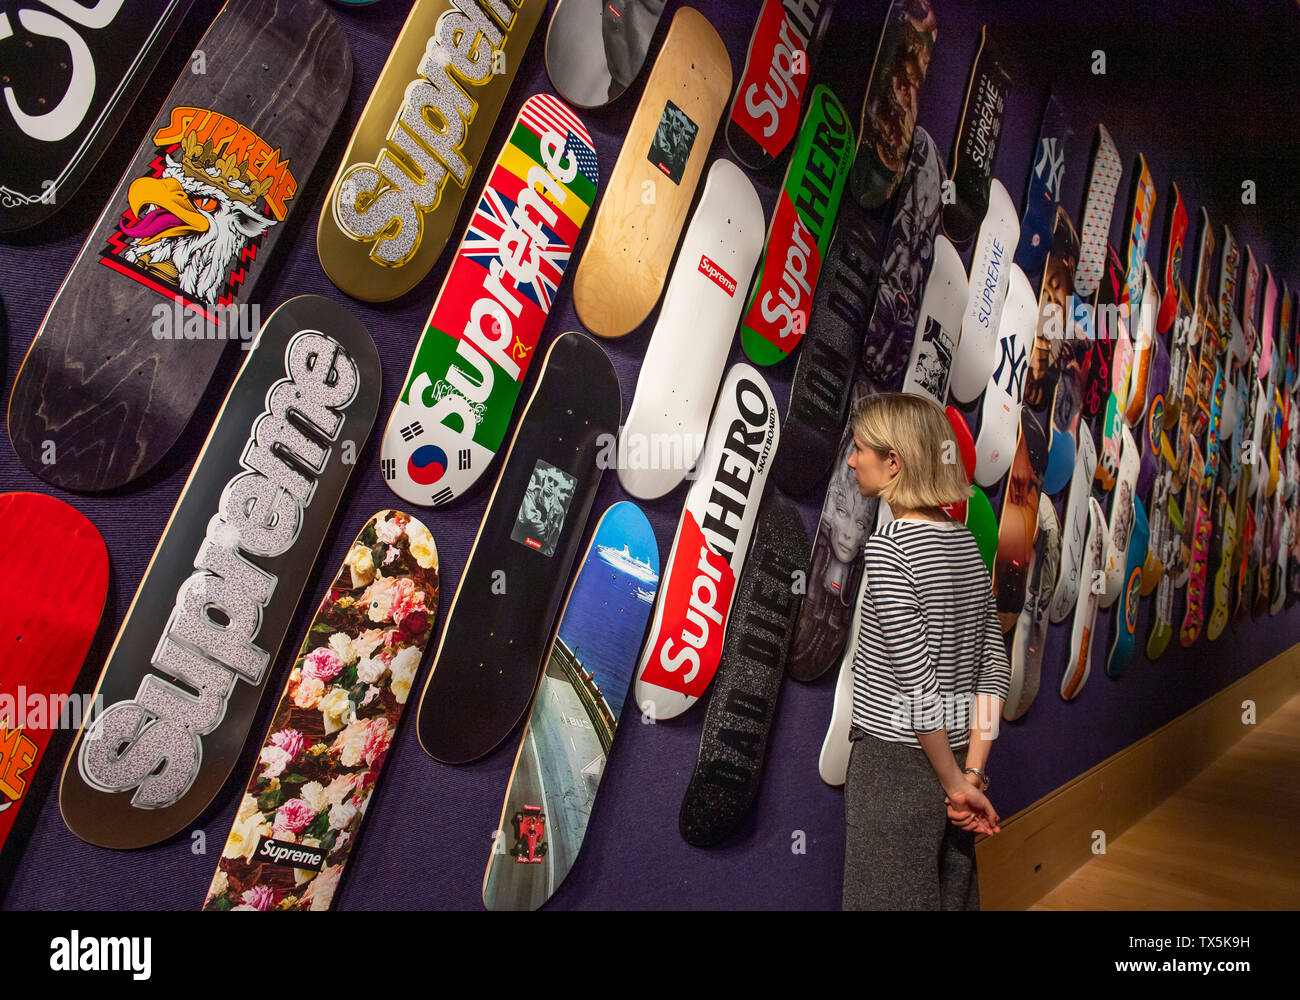 https://c8.alamy.com/comp/TX5K9H/bonhams-new-bond-street-london-uk-24th-june-2019-an-extremely-rare-and-complete-collection-of-131-supreme-full-sized-skateboard-decks-produced-by-the-streetwear-brand-supreme-new-york-between-2011-2019-is-on-view-before-the-modern-and-contemporary-art-sale-on-27th-june-2019-the-decks-being-sold-as-a-single-lot-feature-works-by-renowned-contemporary-artists-such-as-the-chapman-brothers-urs-fischer-cindy-sherman-nan-goldin-and-mike-kelley-the-collection-has-an-estimate-of-100000-150000-credit-malcolm-parkalamy-live-news-TX5K9H.jpg